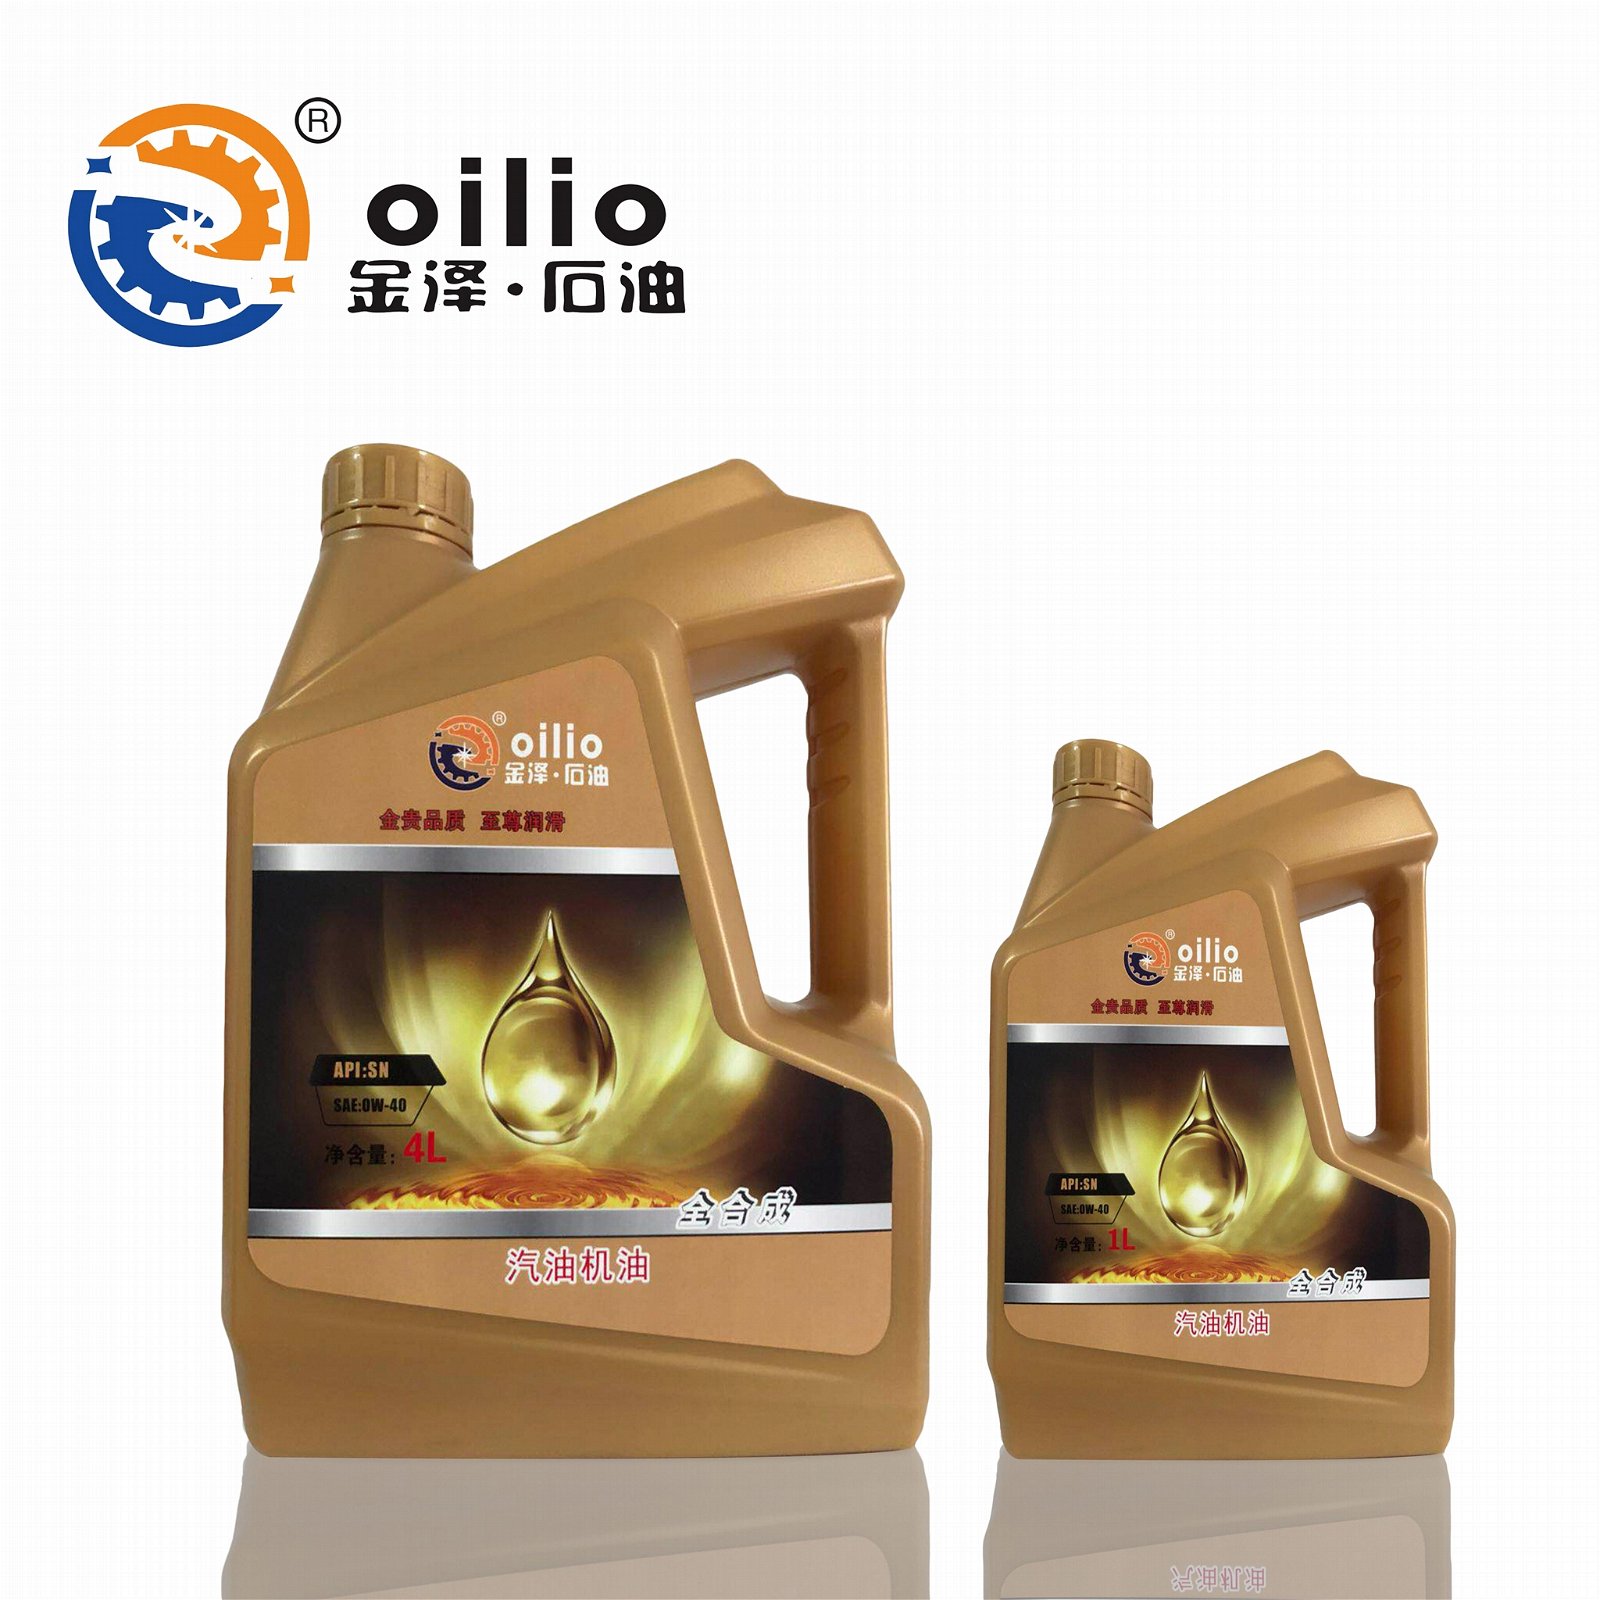 Fully synthetic engine oil